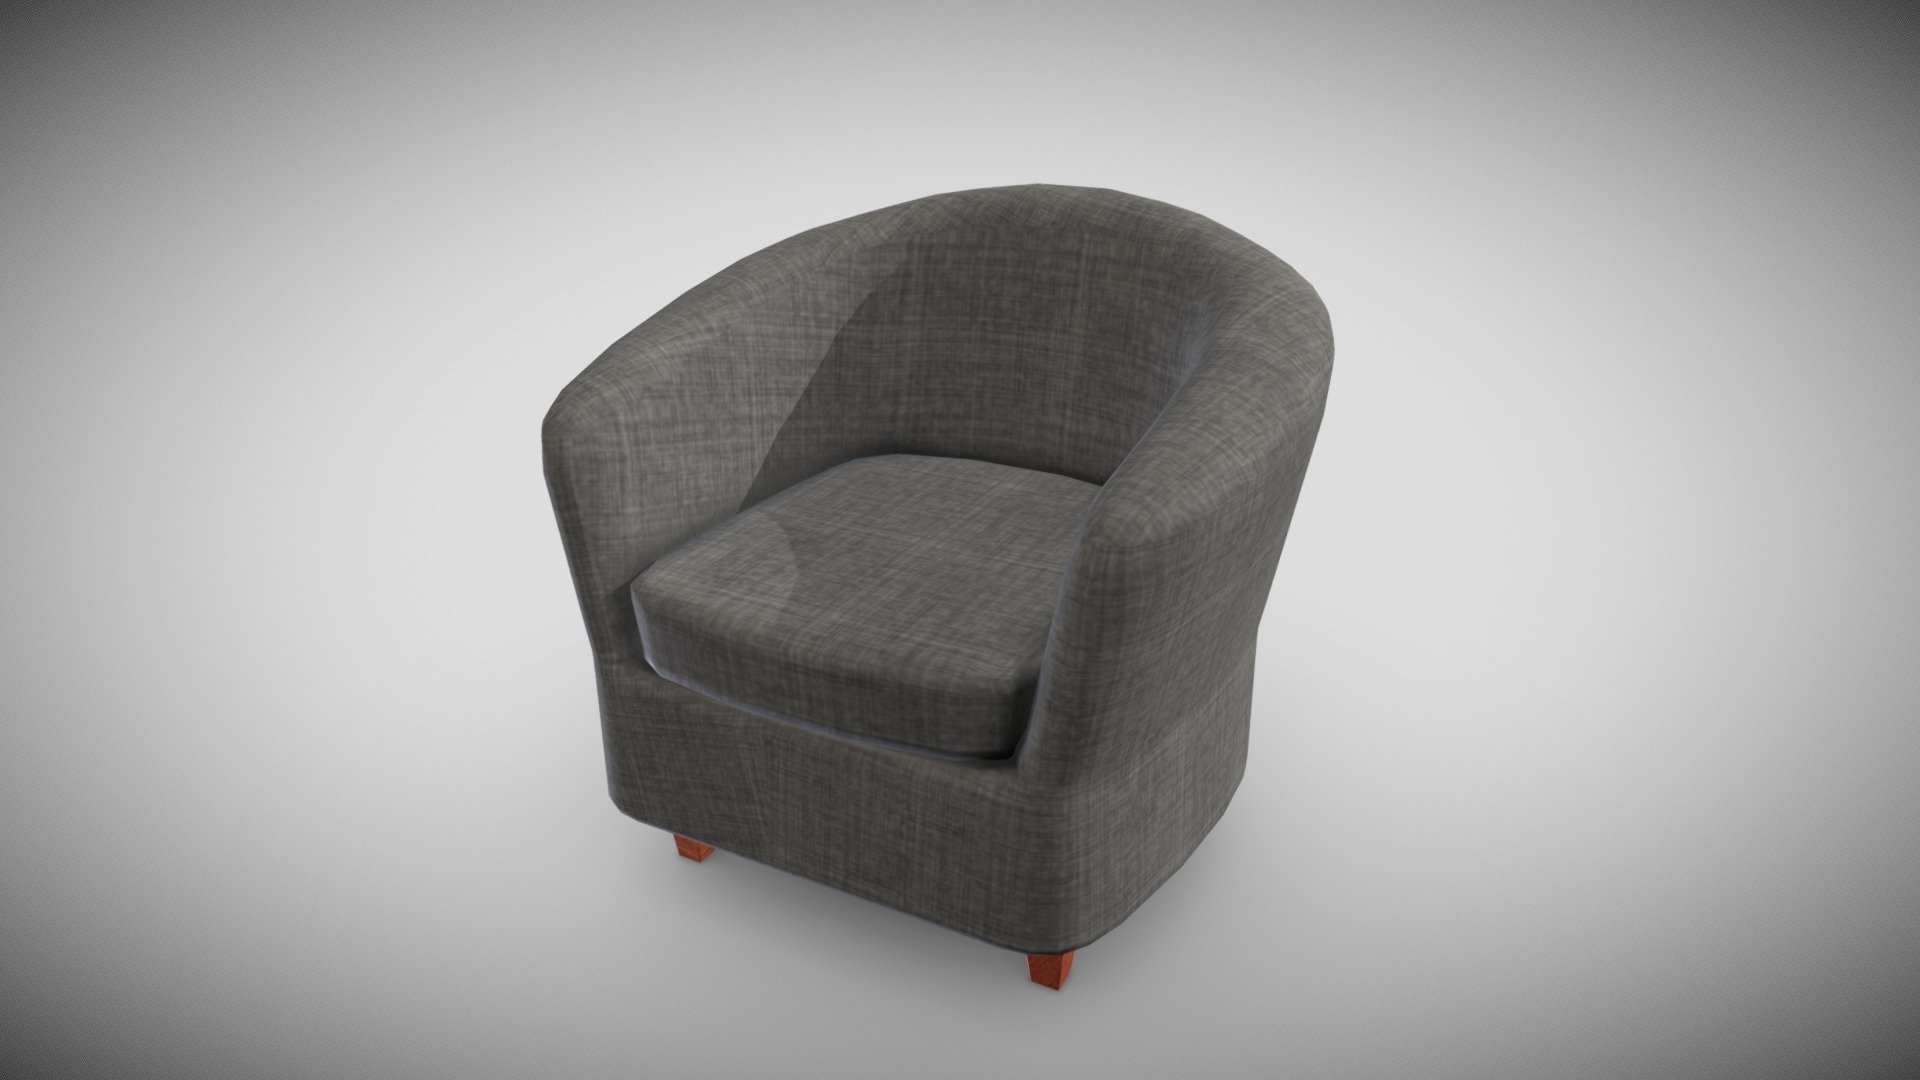 A semi-modern looking basic armchair. Perfect for a Doctors waiting room or similar.

Texture size: 1024 x 1024 3d model